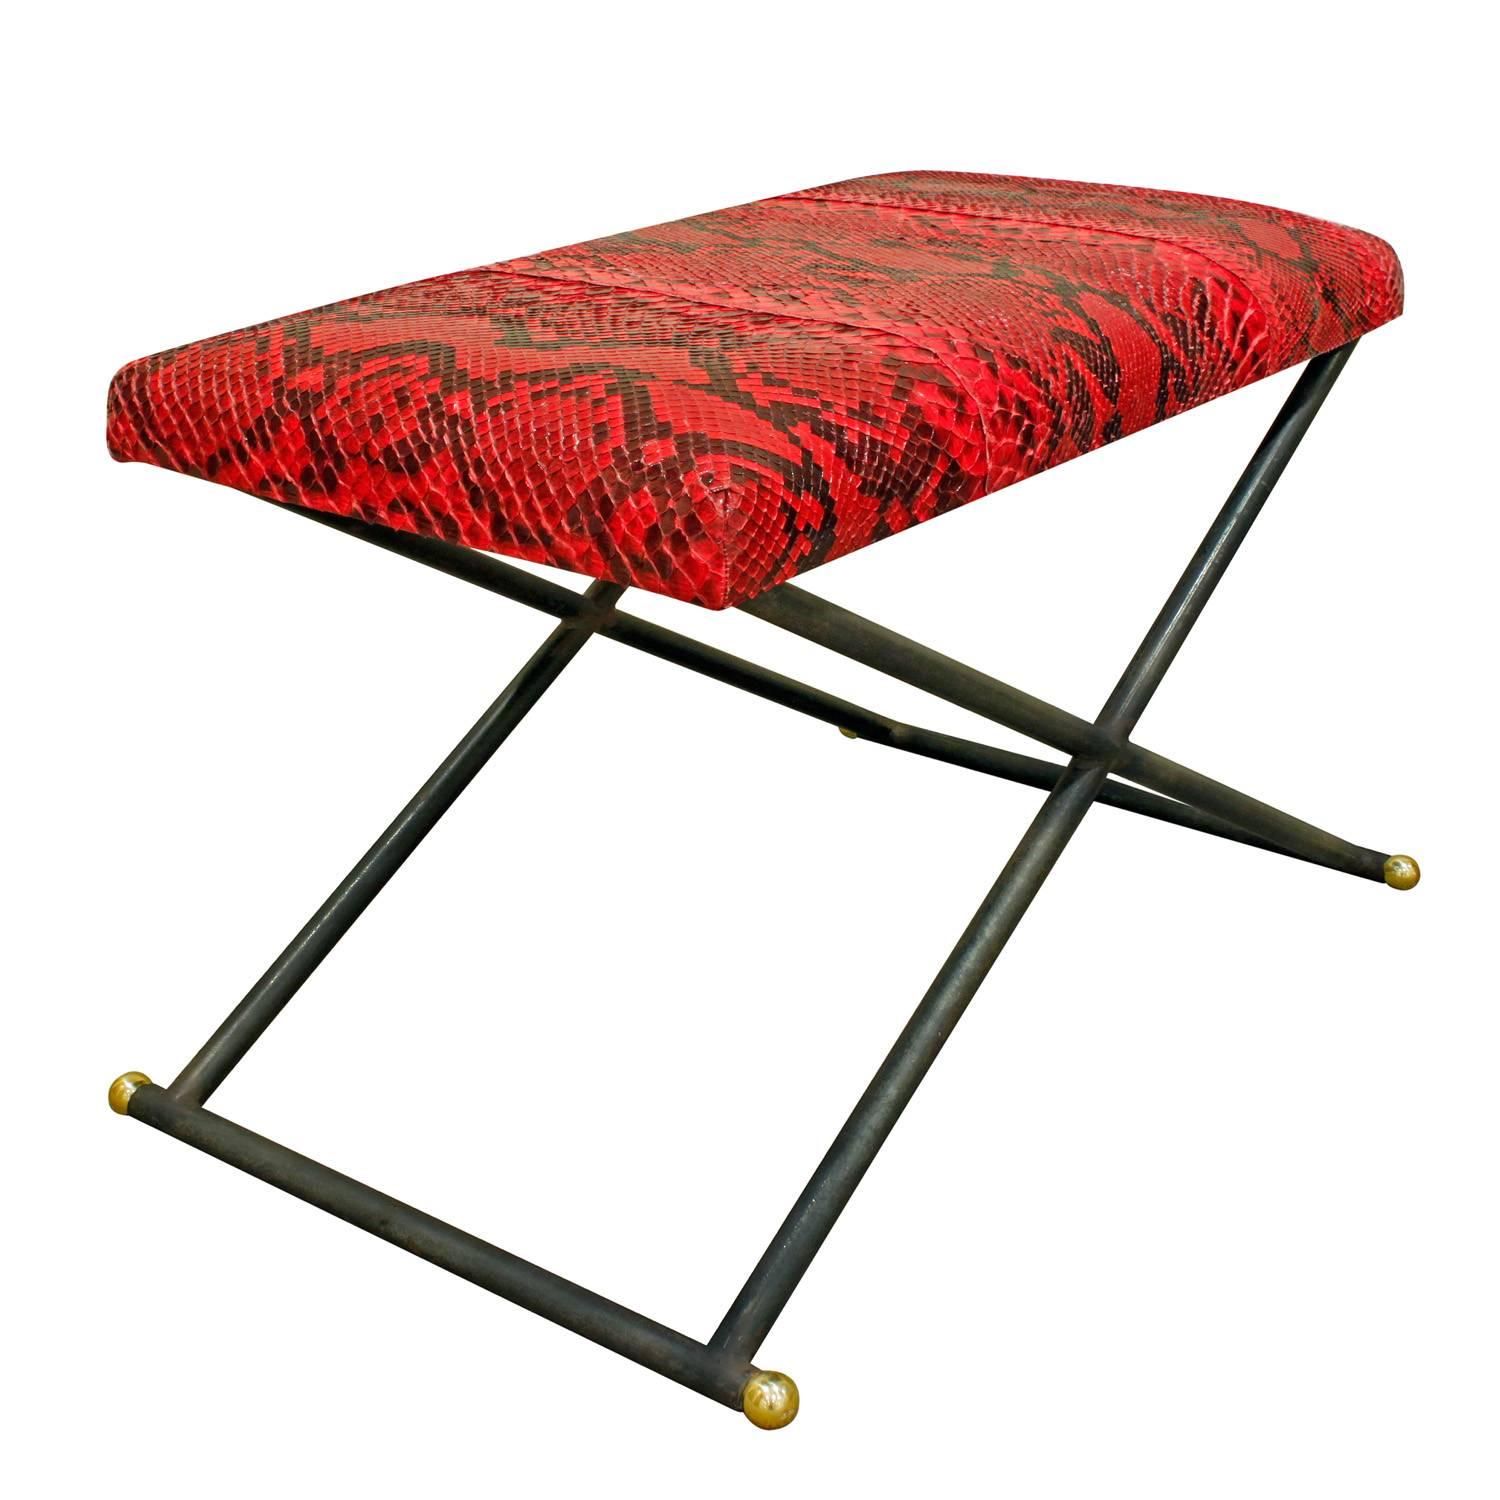 Rare X-bench in steel with brass accents and stitched python seat by Karl Springer, American, 1970s.

Reference:
Karl Springer catalog, published in the 1970's, shows a photo of this bench on page 51.
 